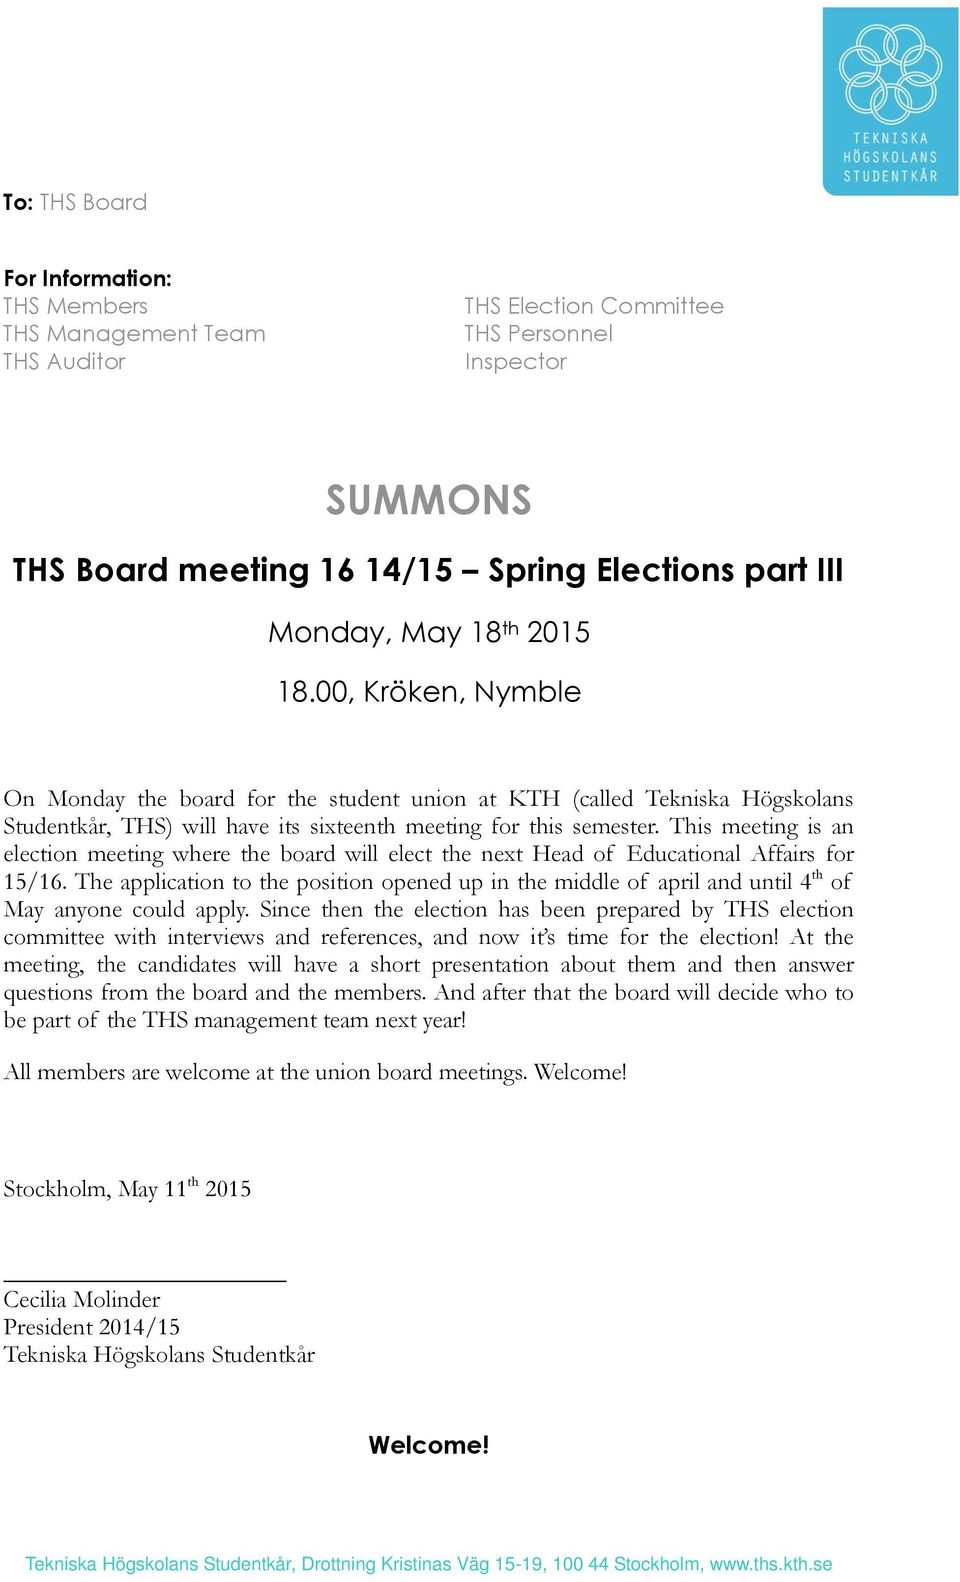 This meeting is an election meeting where the board will elect the next Head of Educational Affairs for 15/16.